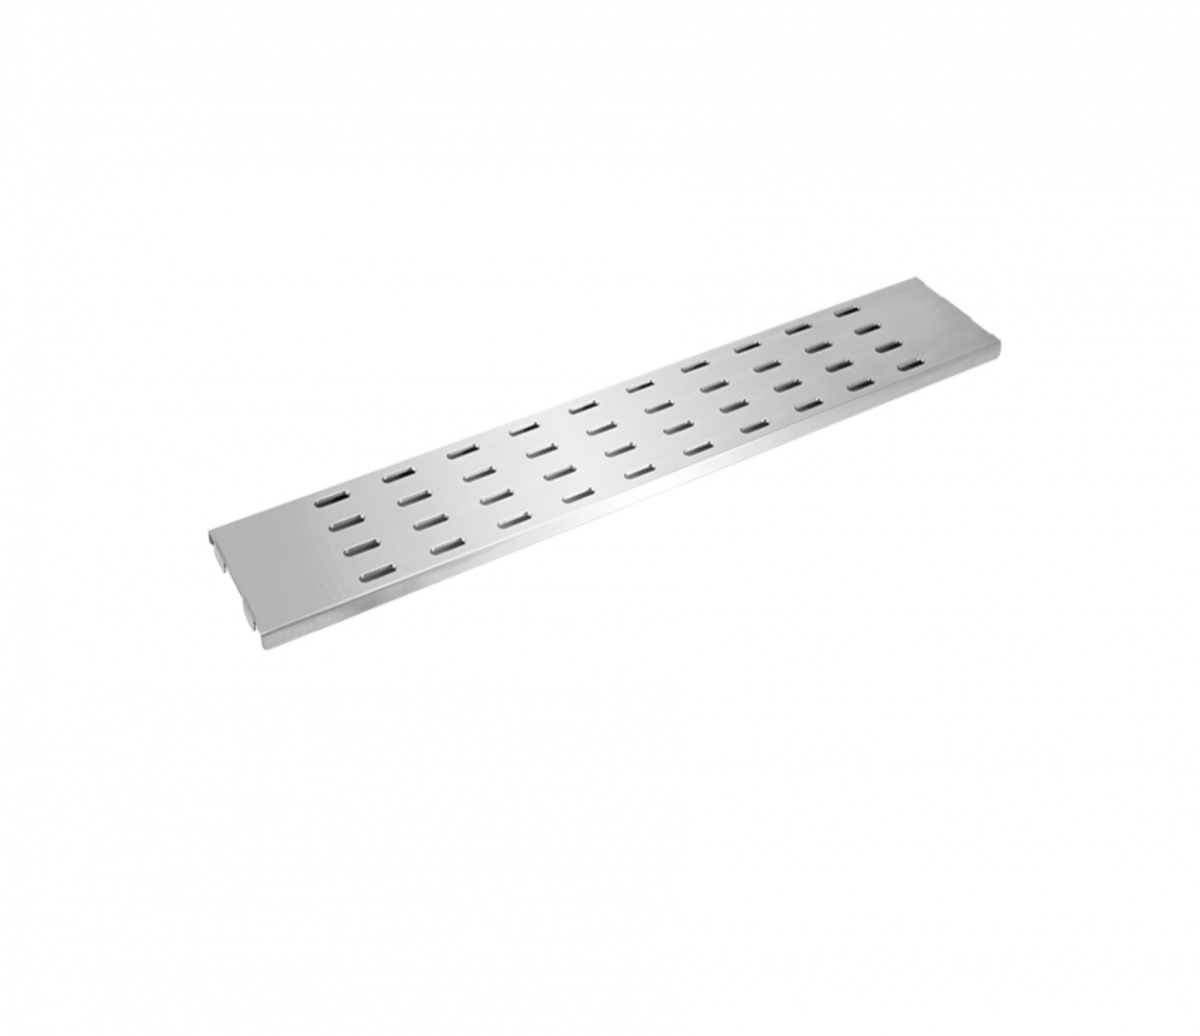 Steel grate for food heating for grill YOER GG01S